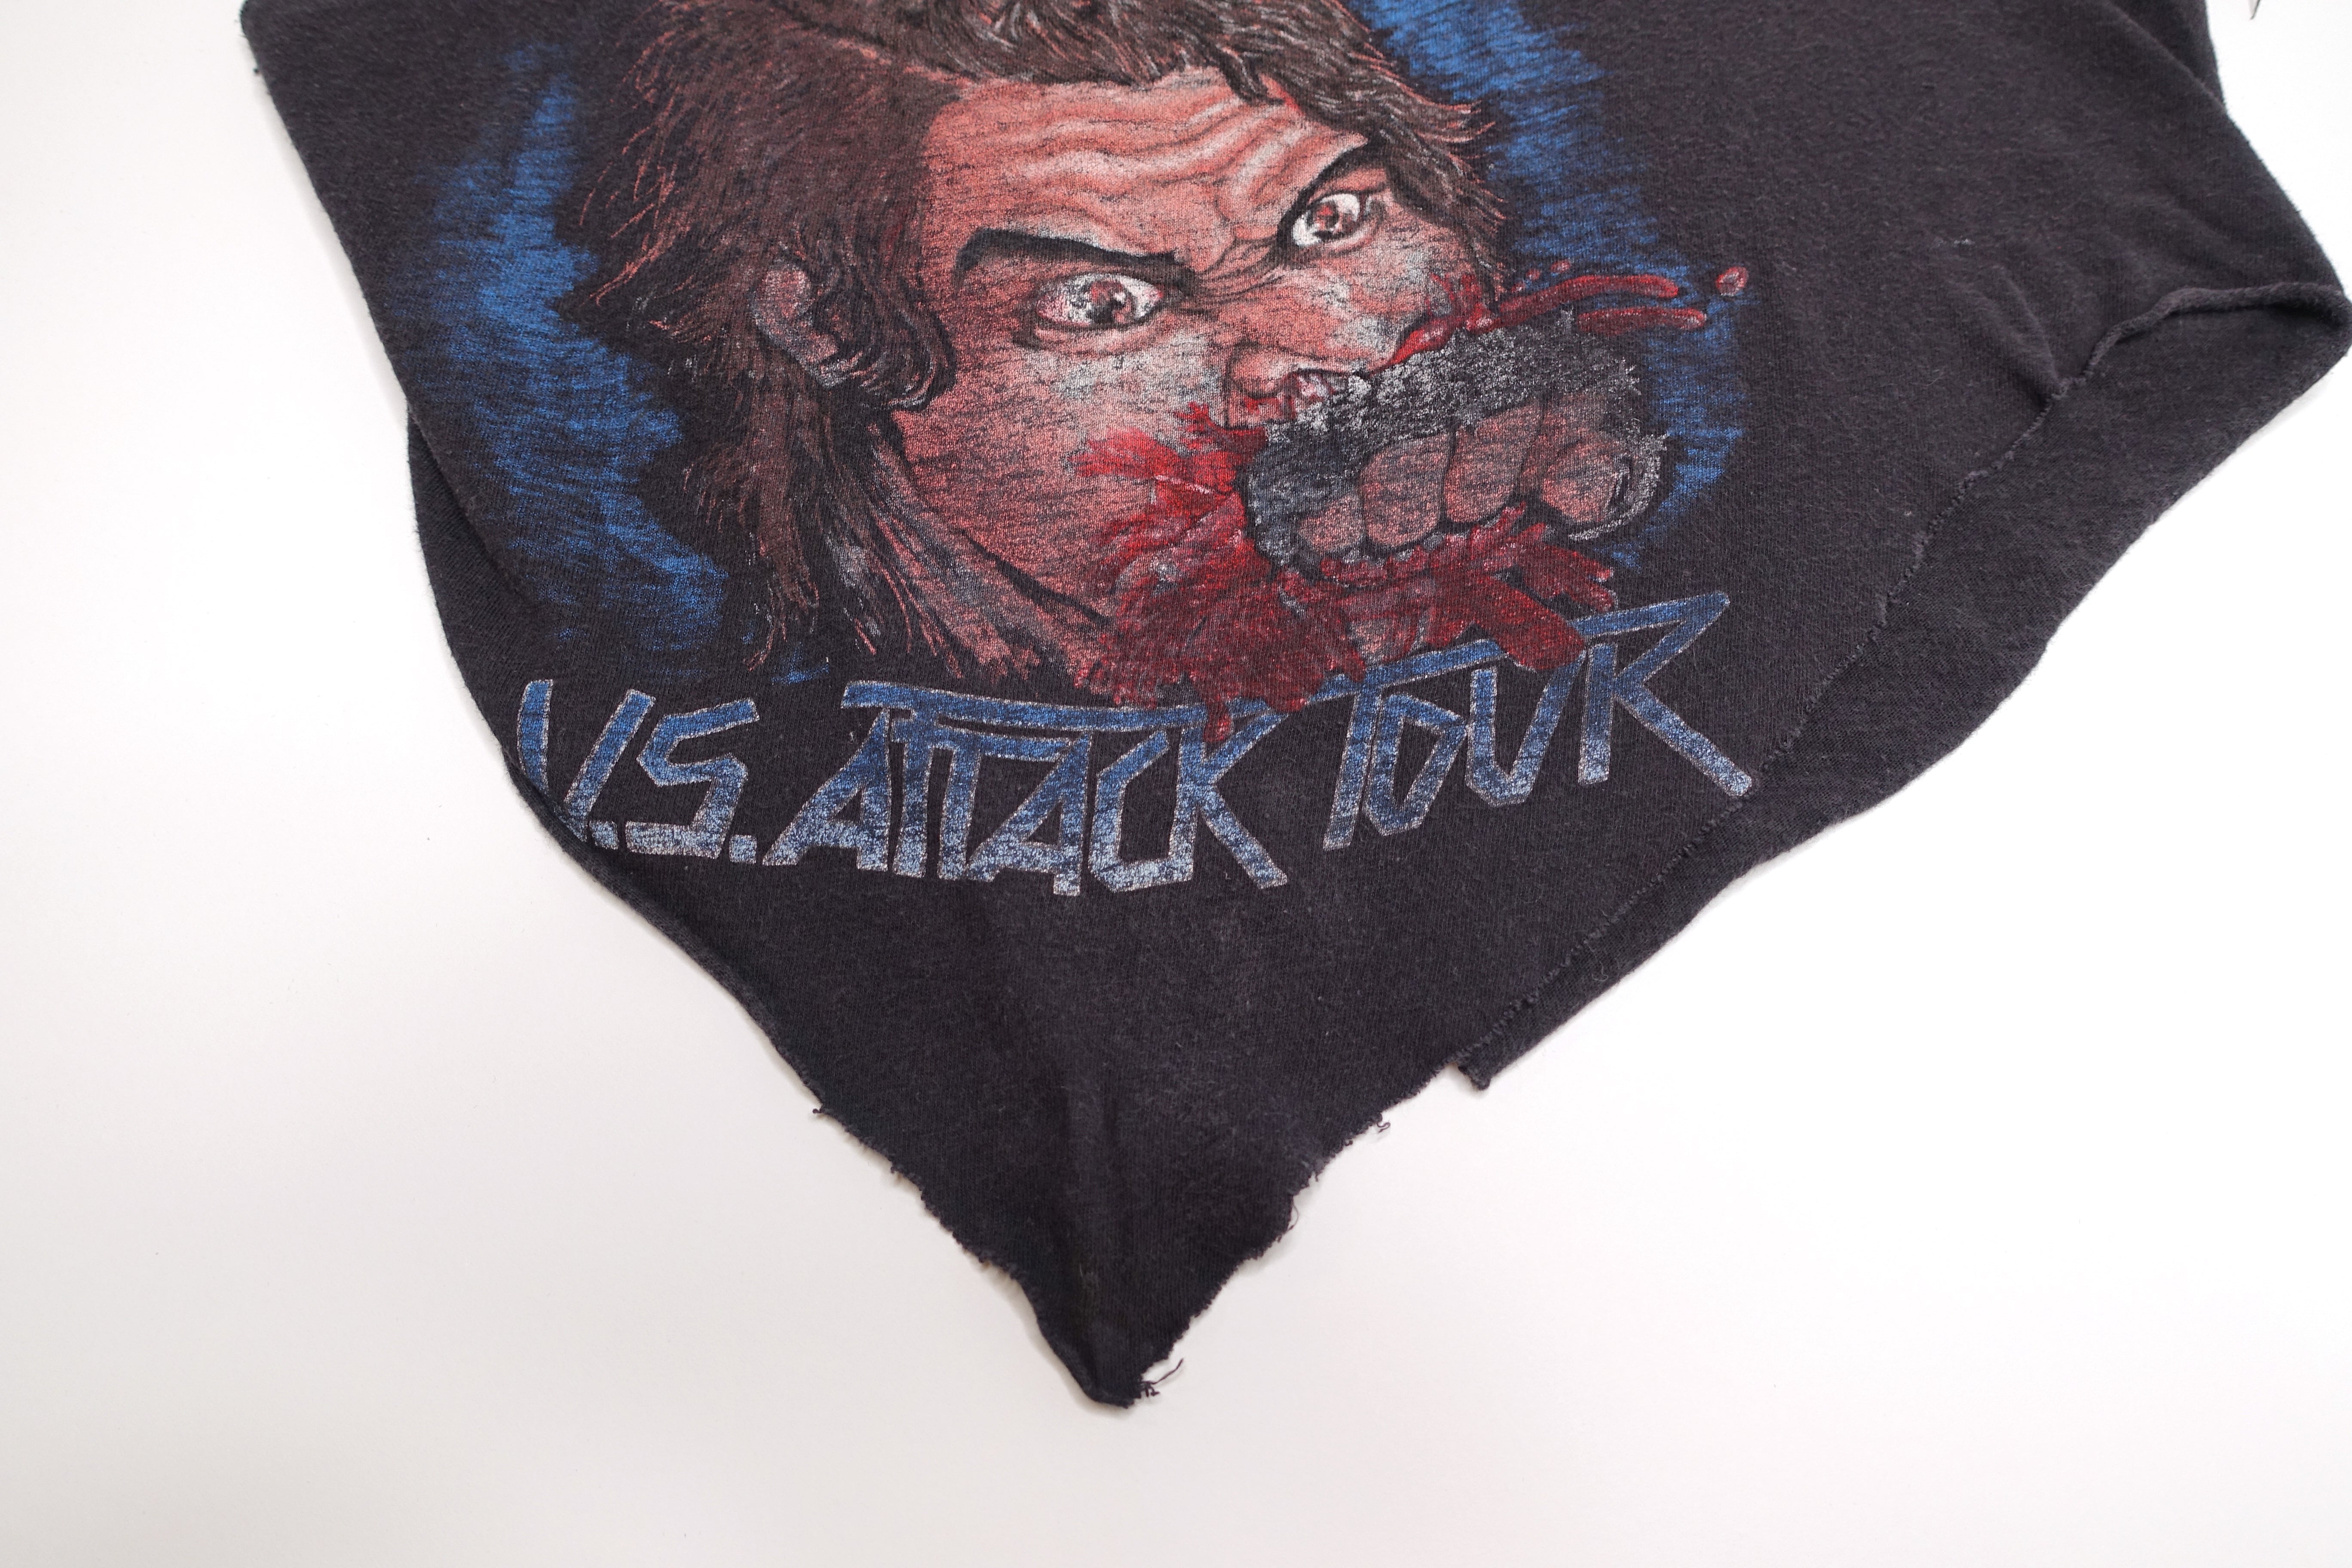 Anthrax ‎– Original Fistful Of Metal / US Attack Tour 1984 (Severely Cropped) Shirt Size Small